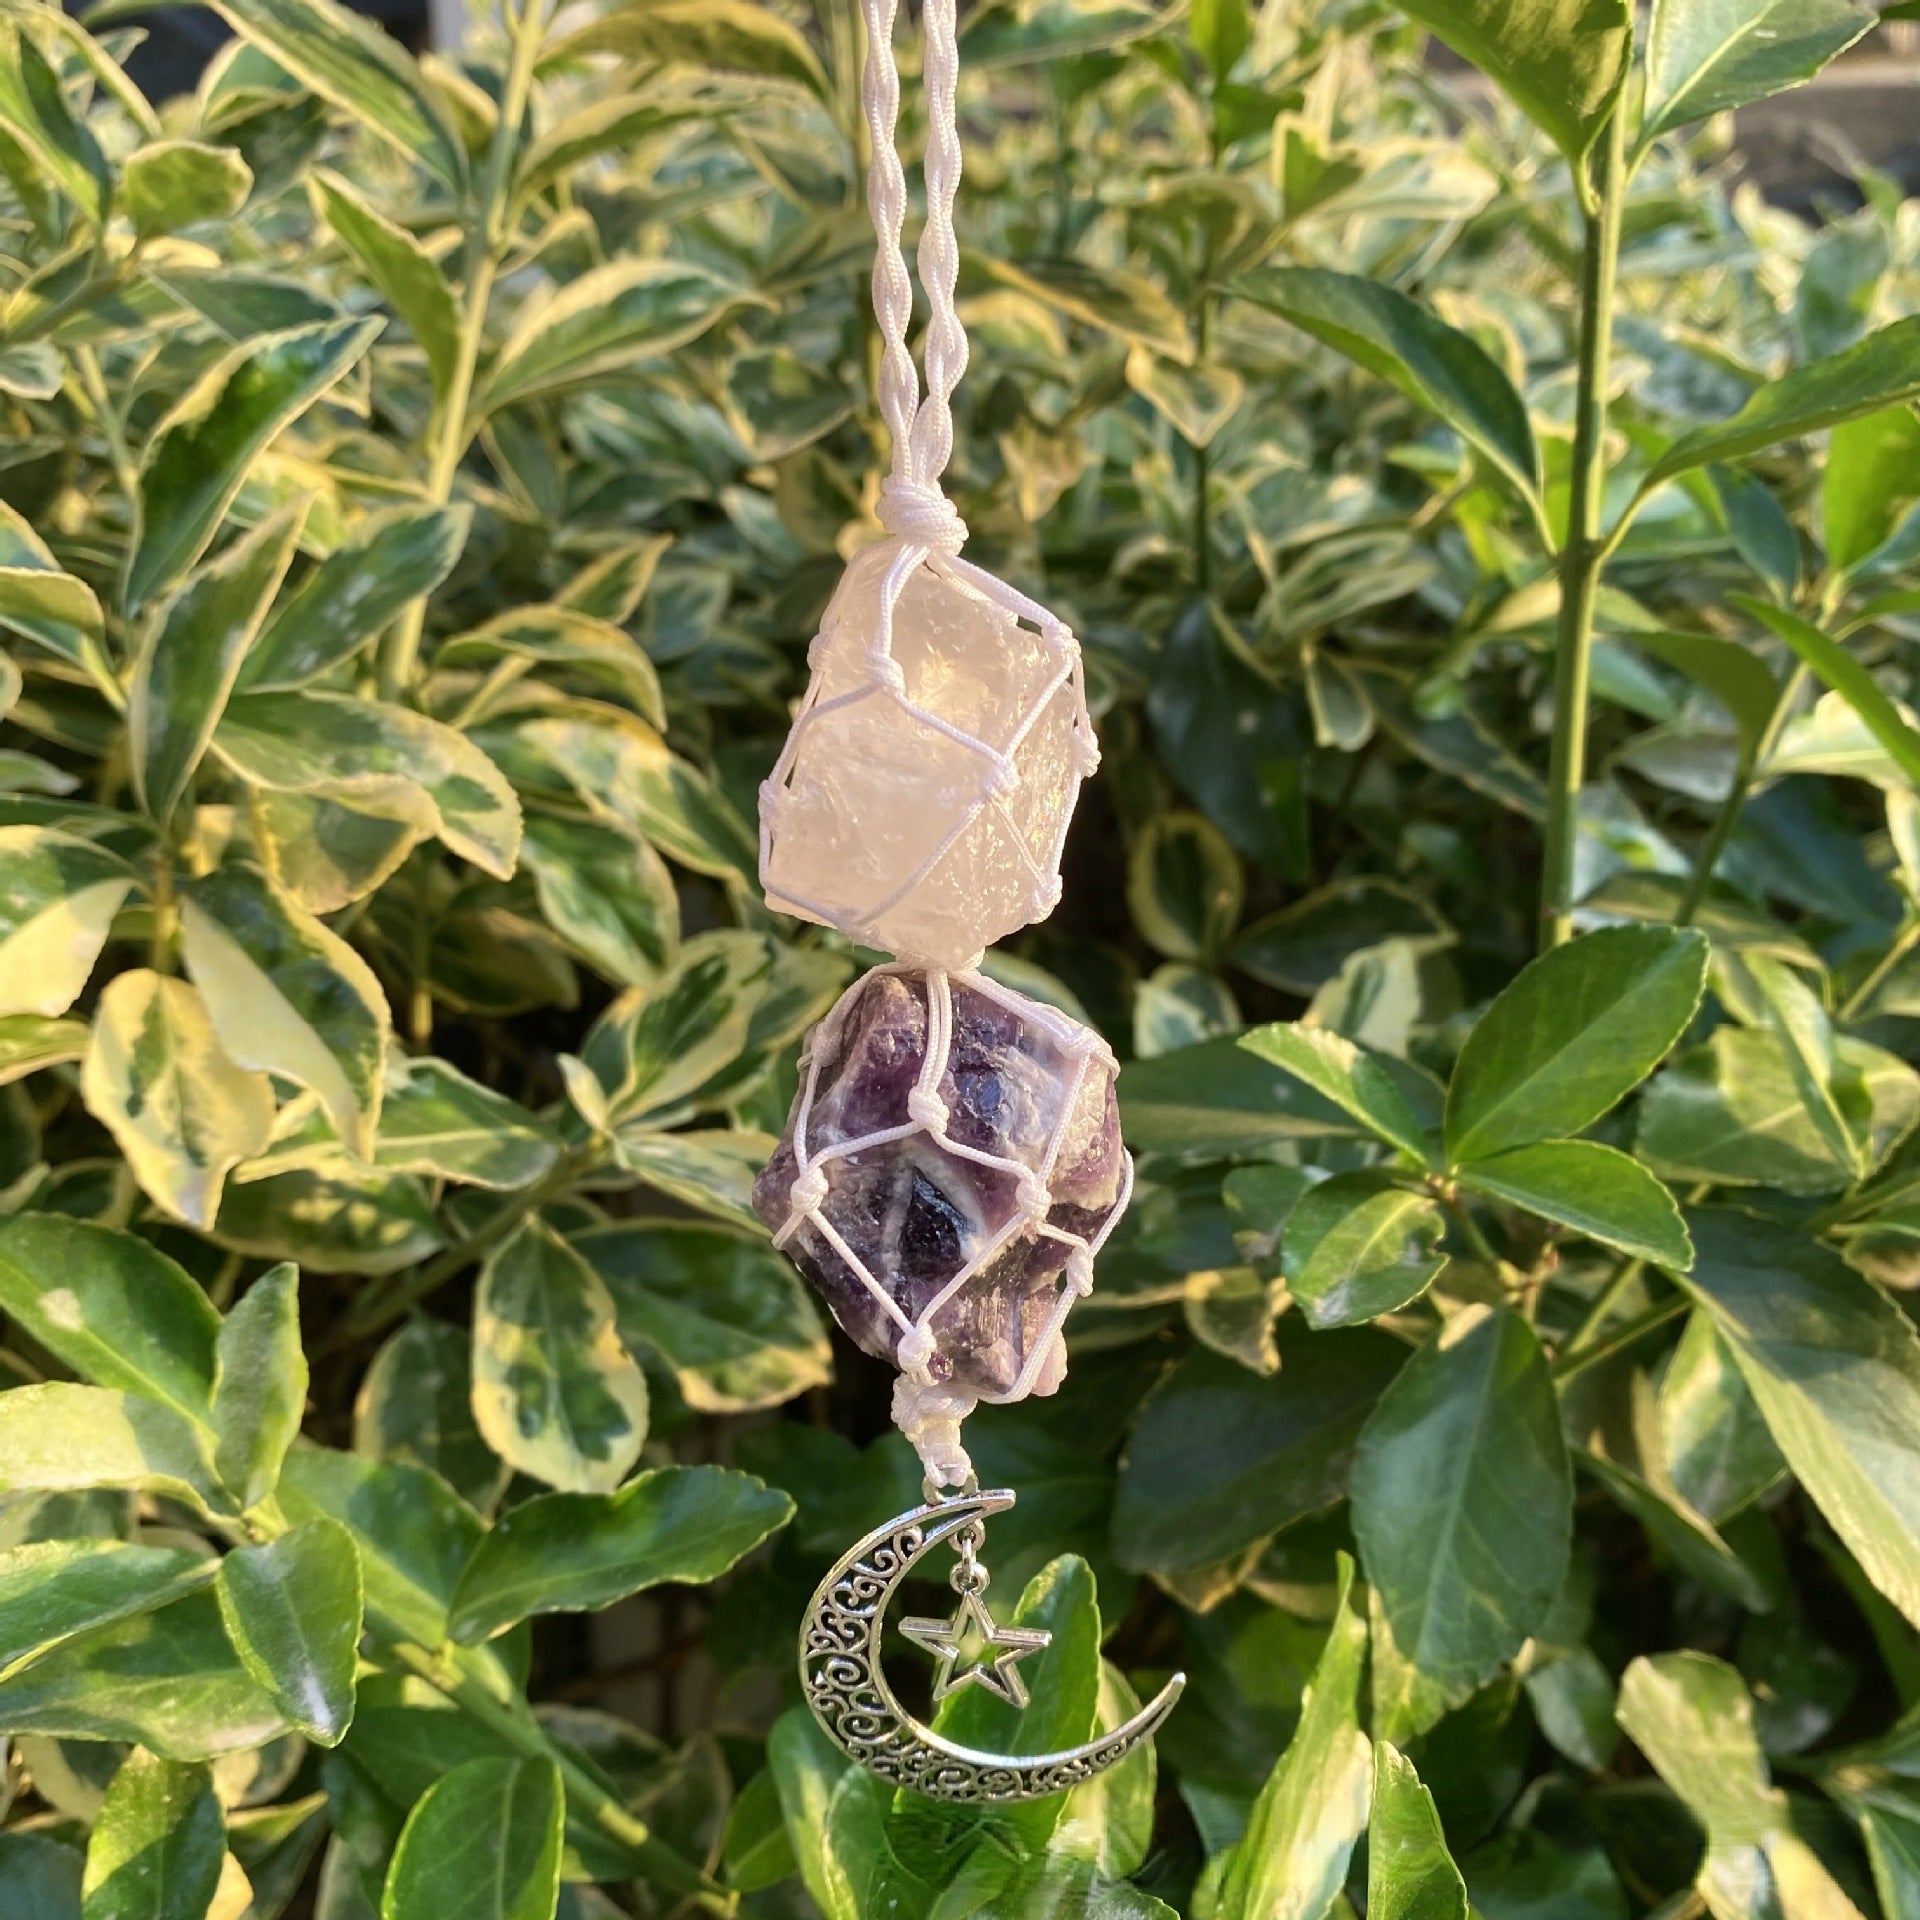 Hot Sale Natural Crystal Stone Automobile Hanging Ornament Handmade Woven Citrine Crystal Stone Hanging Ornament Energy Crystal